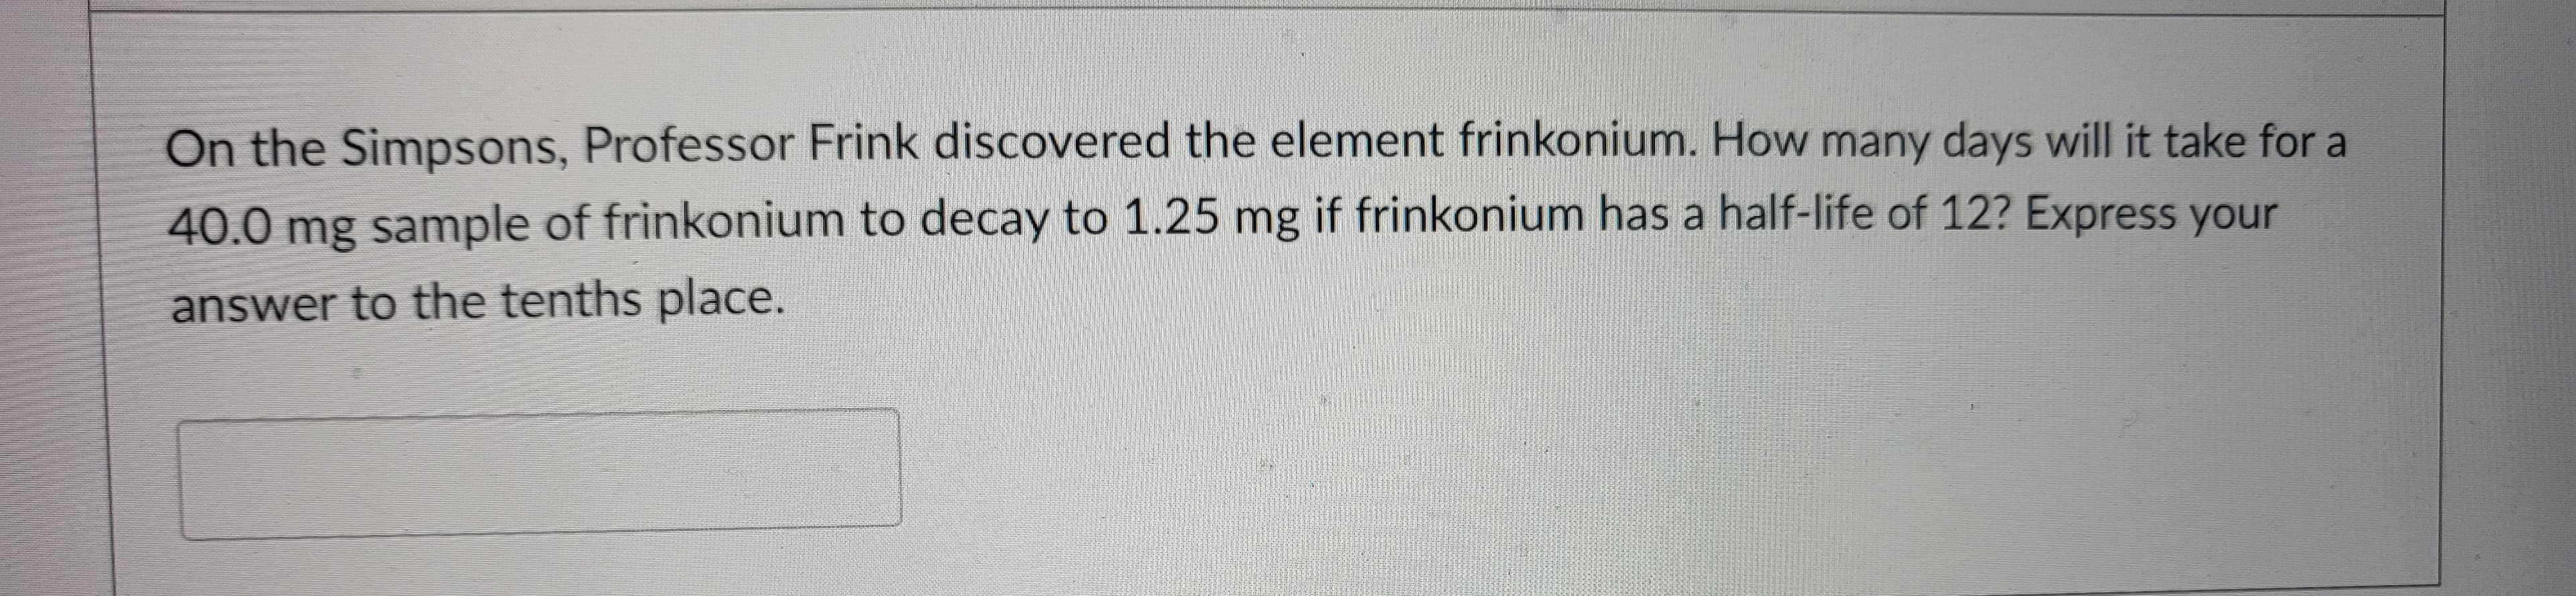 On the Simpsons, Professor Frink discovered the element frinkonium. How many days will it take for a
40.0 mg sample of frinkonium to decay to 1.25 mg if frinkonium has a half-life of 12? Express your
answer to the tenths place.